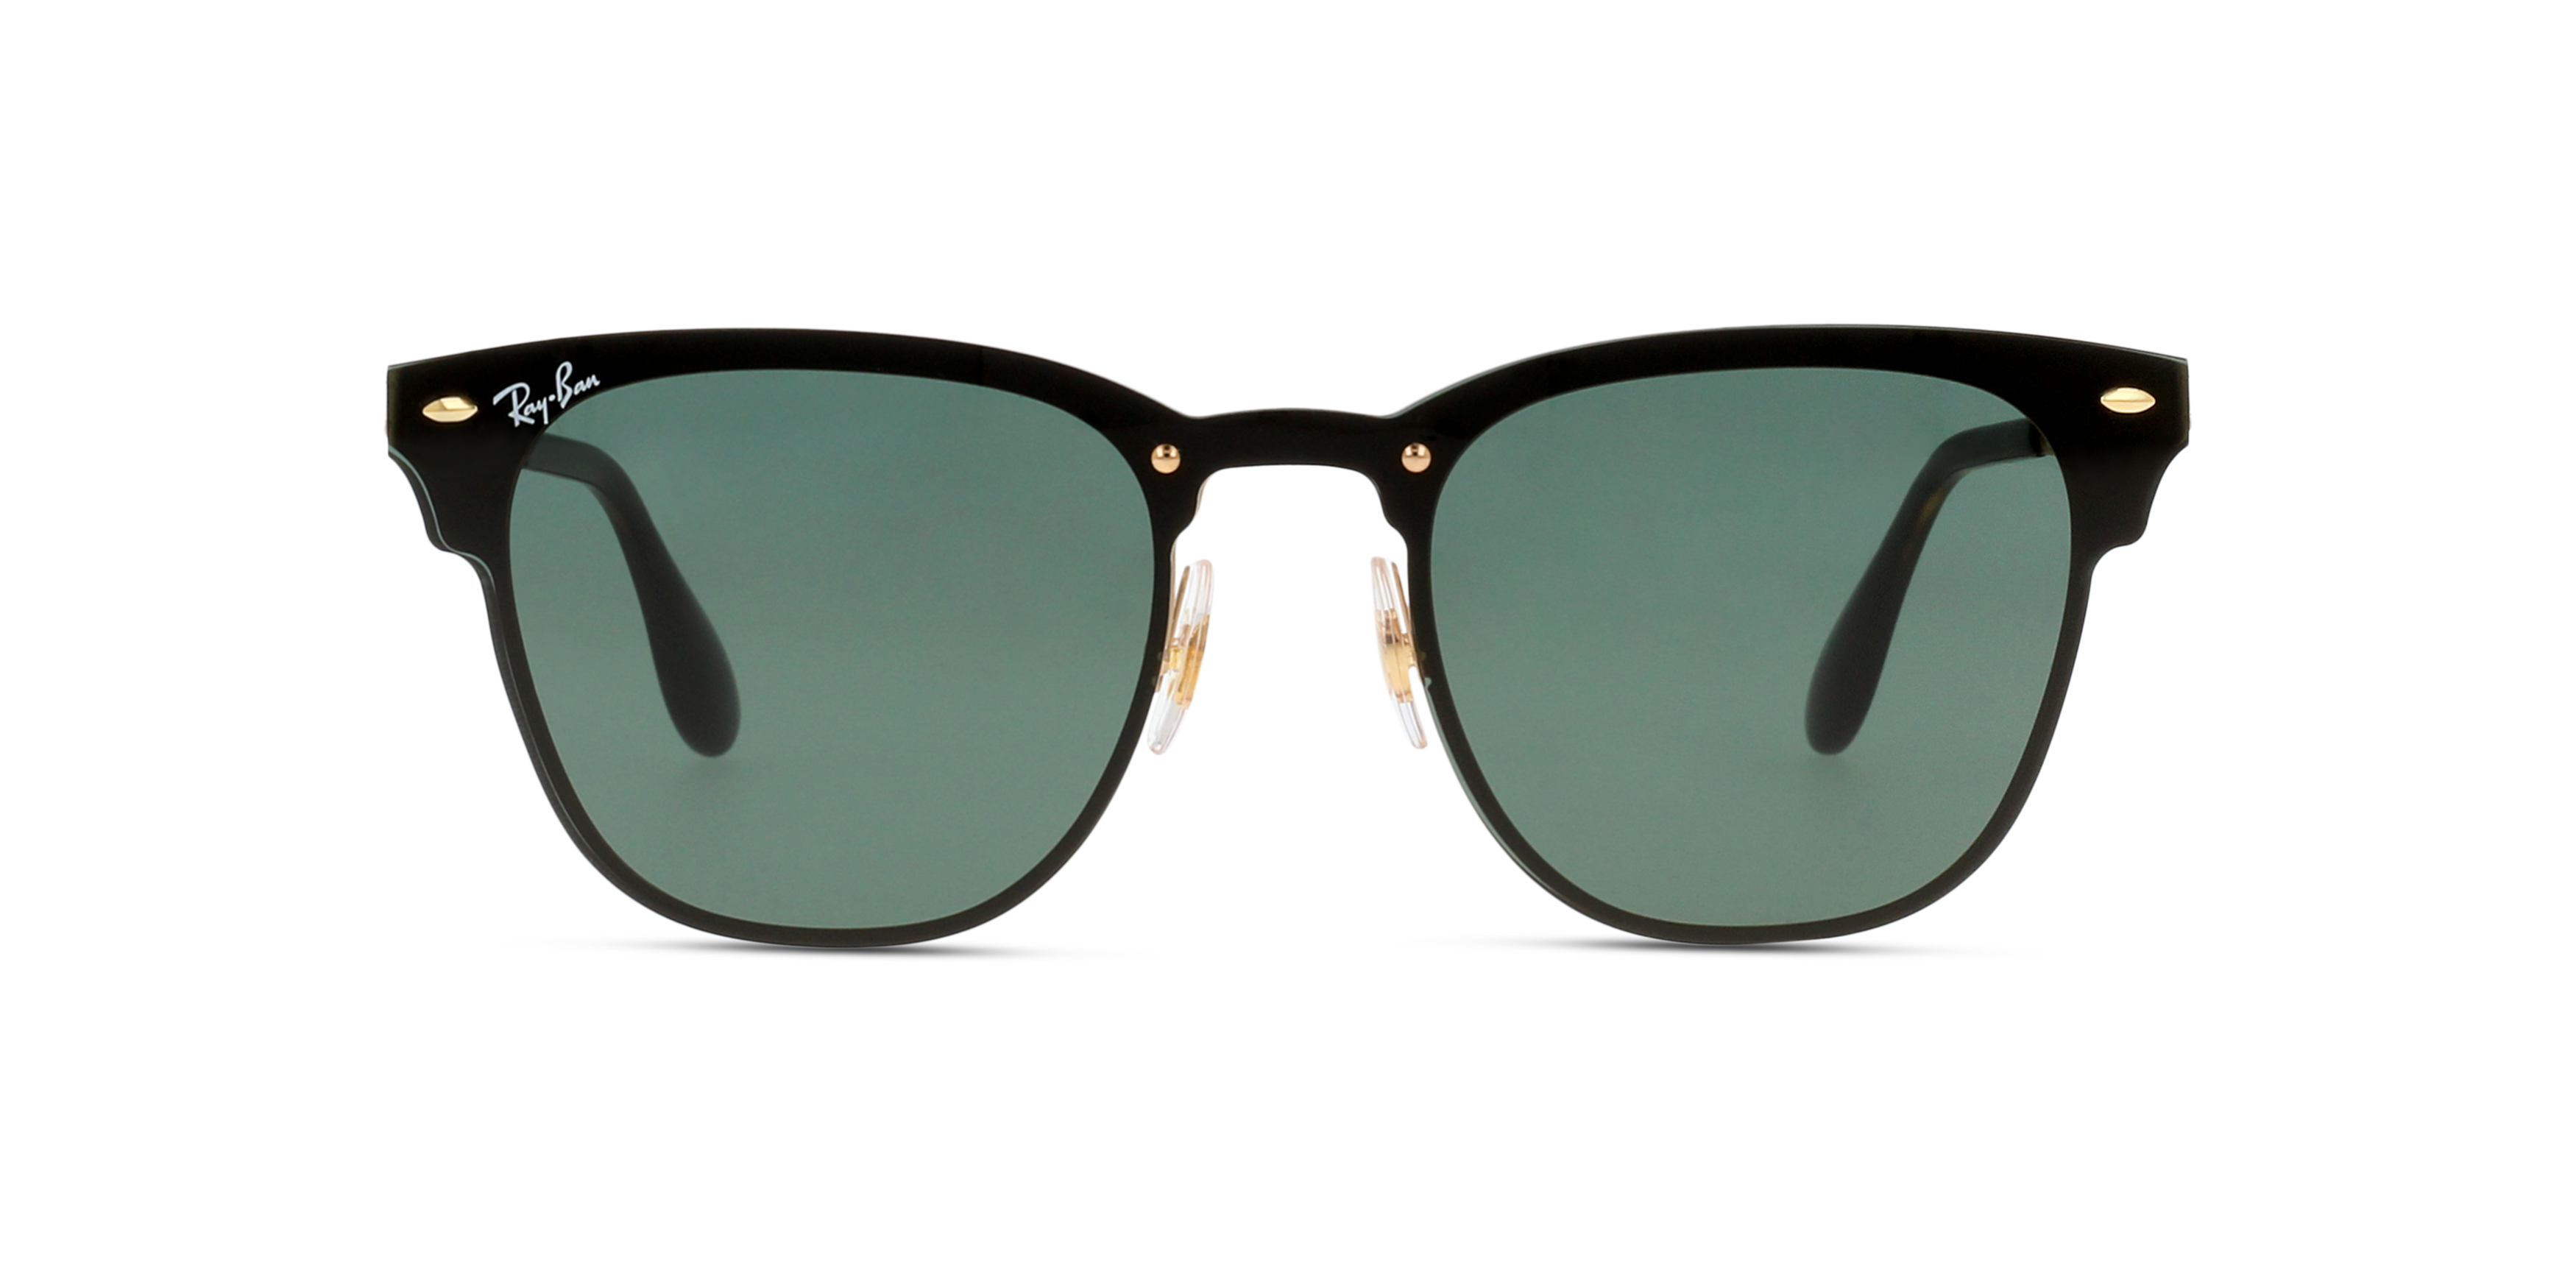 [products.image.front] Ray-Ban Blaze Clubmaster RB3576N 043/71